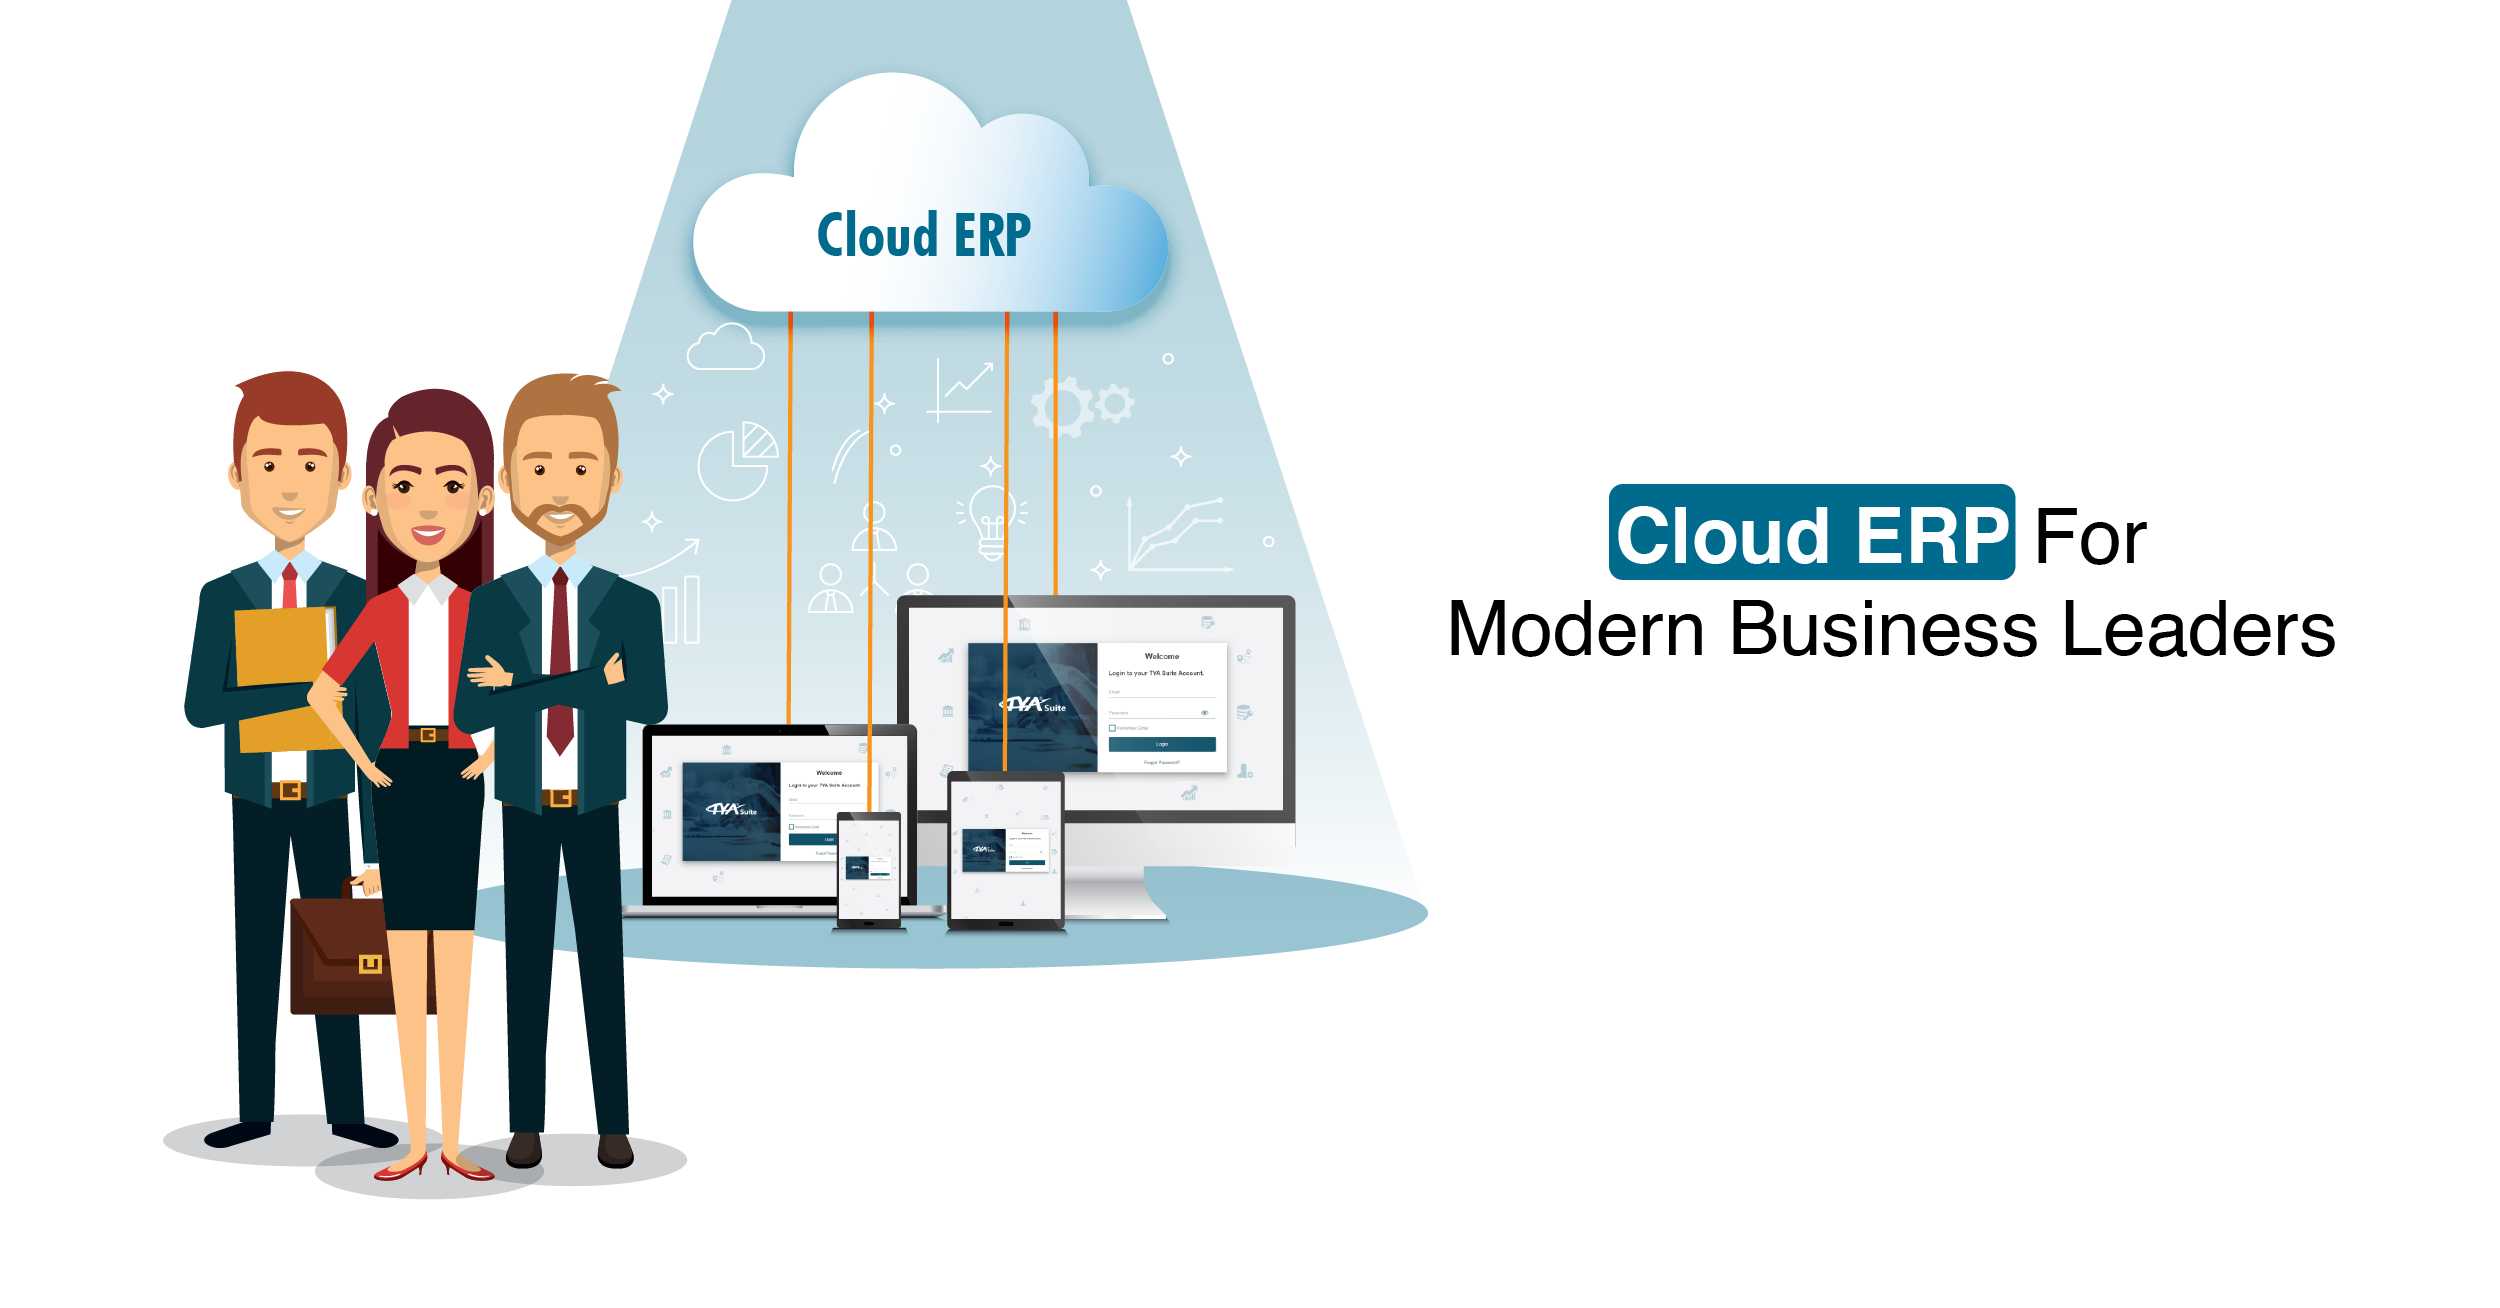 Driving Efficiency with Cloud ERP for Modern Business Leaders